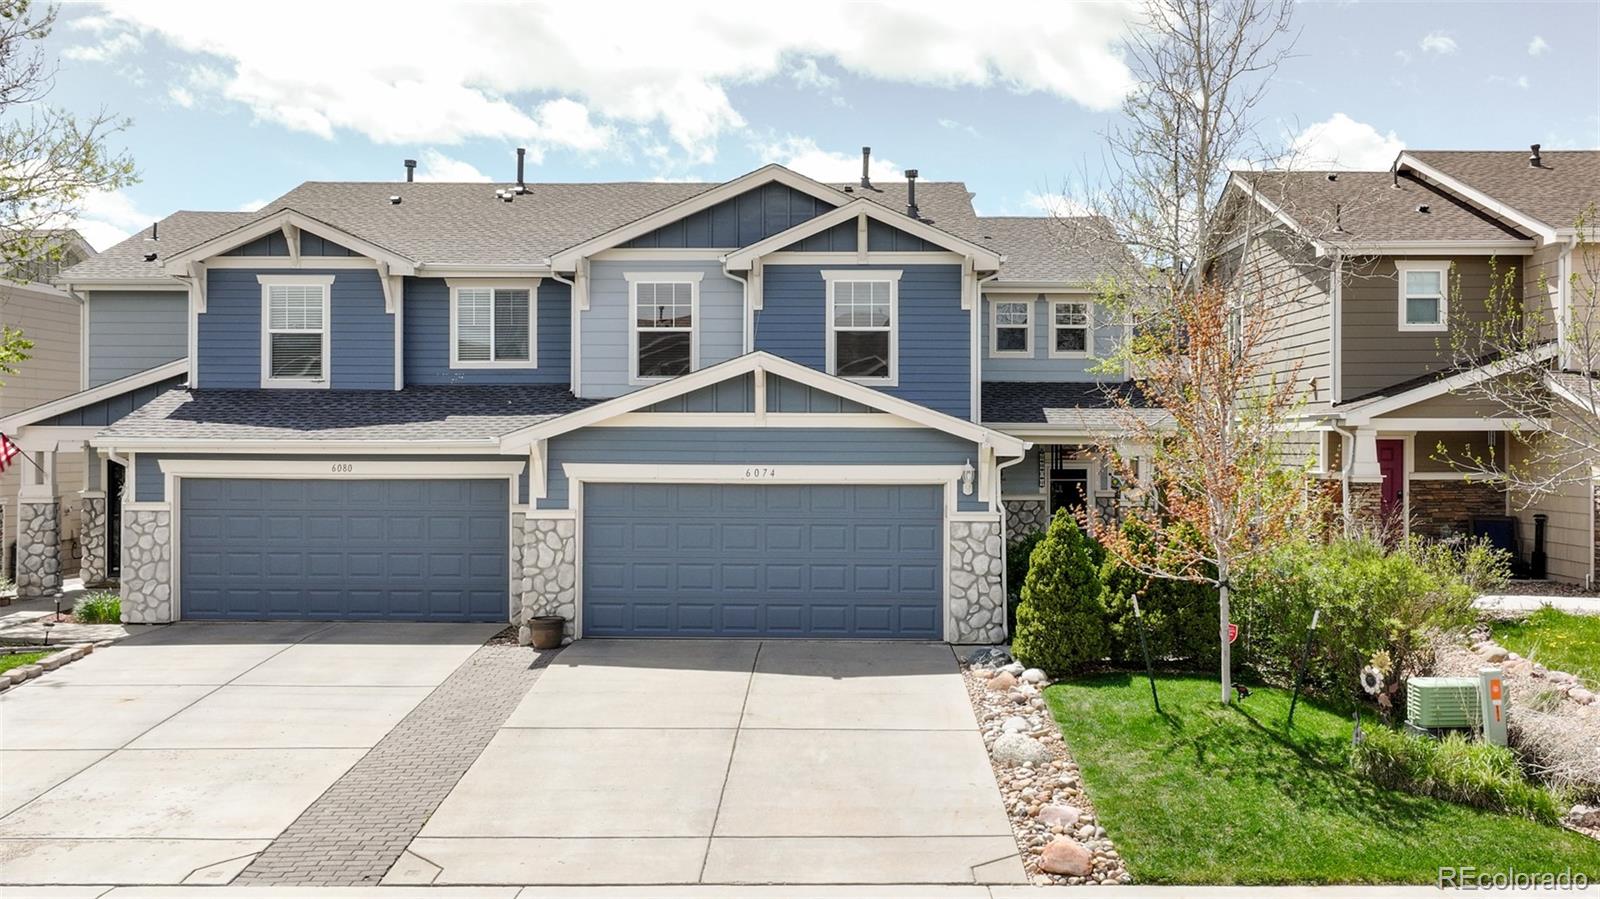 6074  Raleigh Circle, castle rock MLS: 6222767 Beds: 3 Baths: 3 Price: $494,000